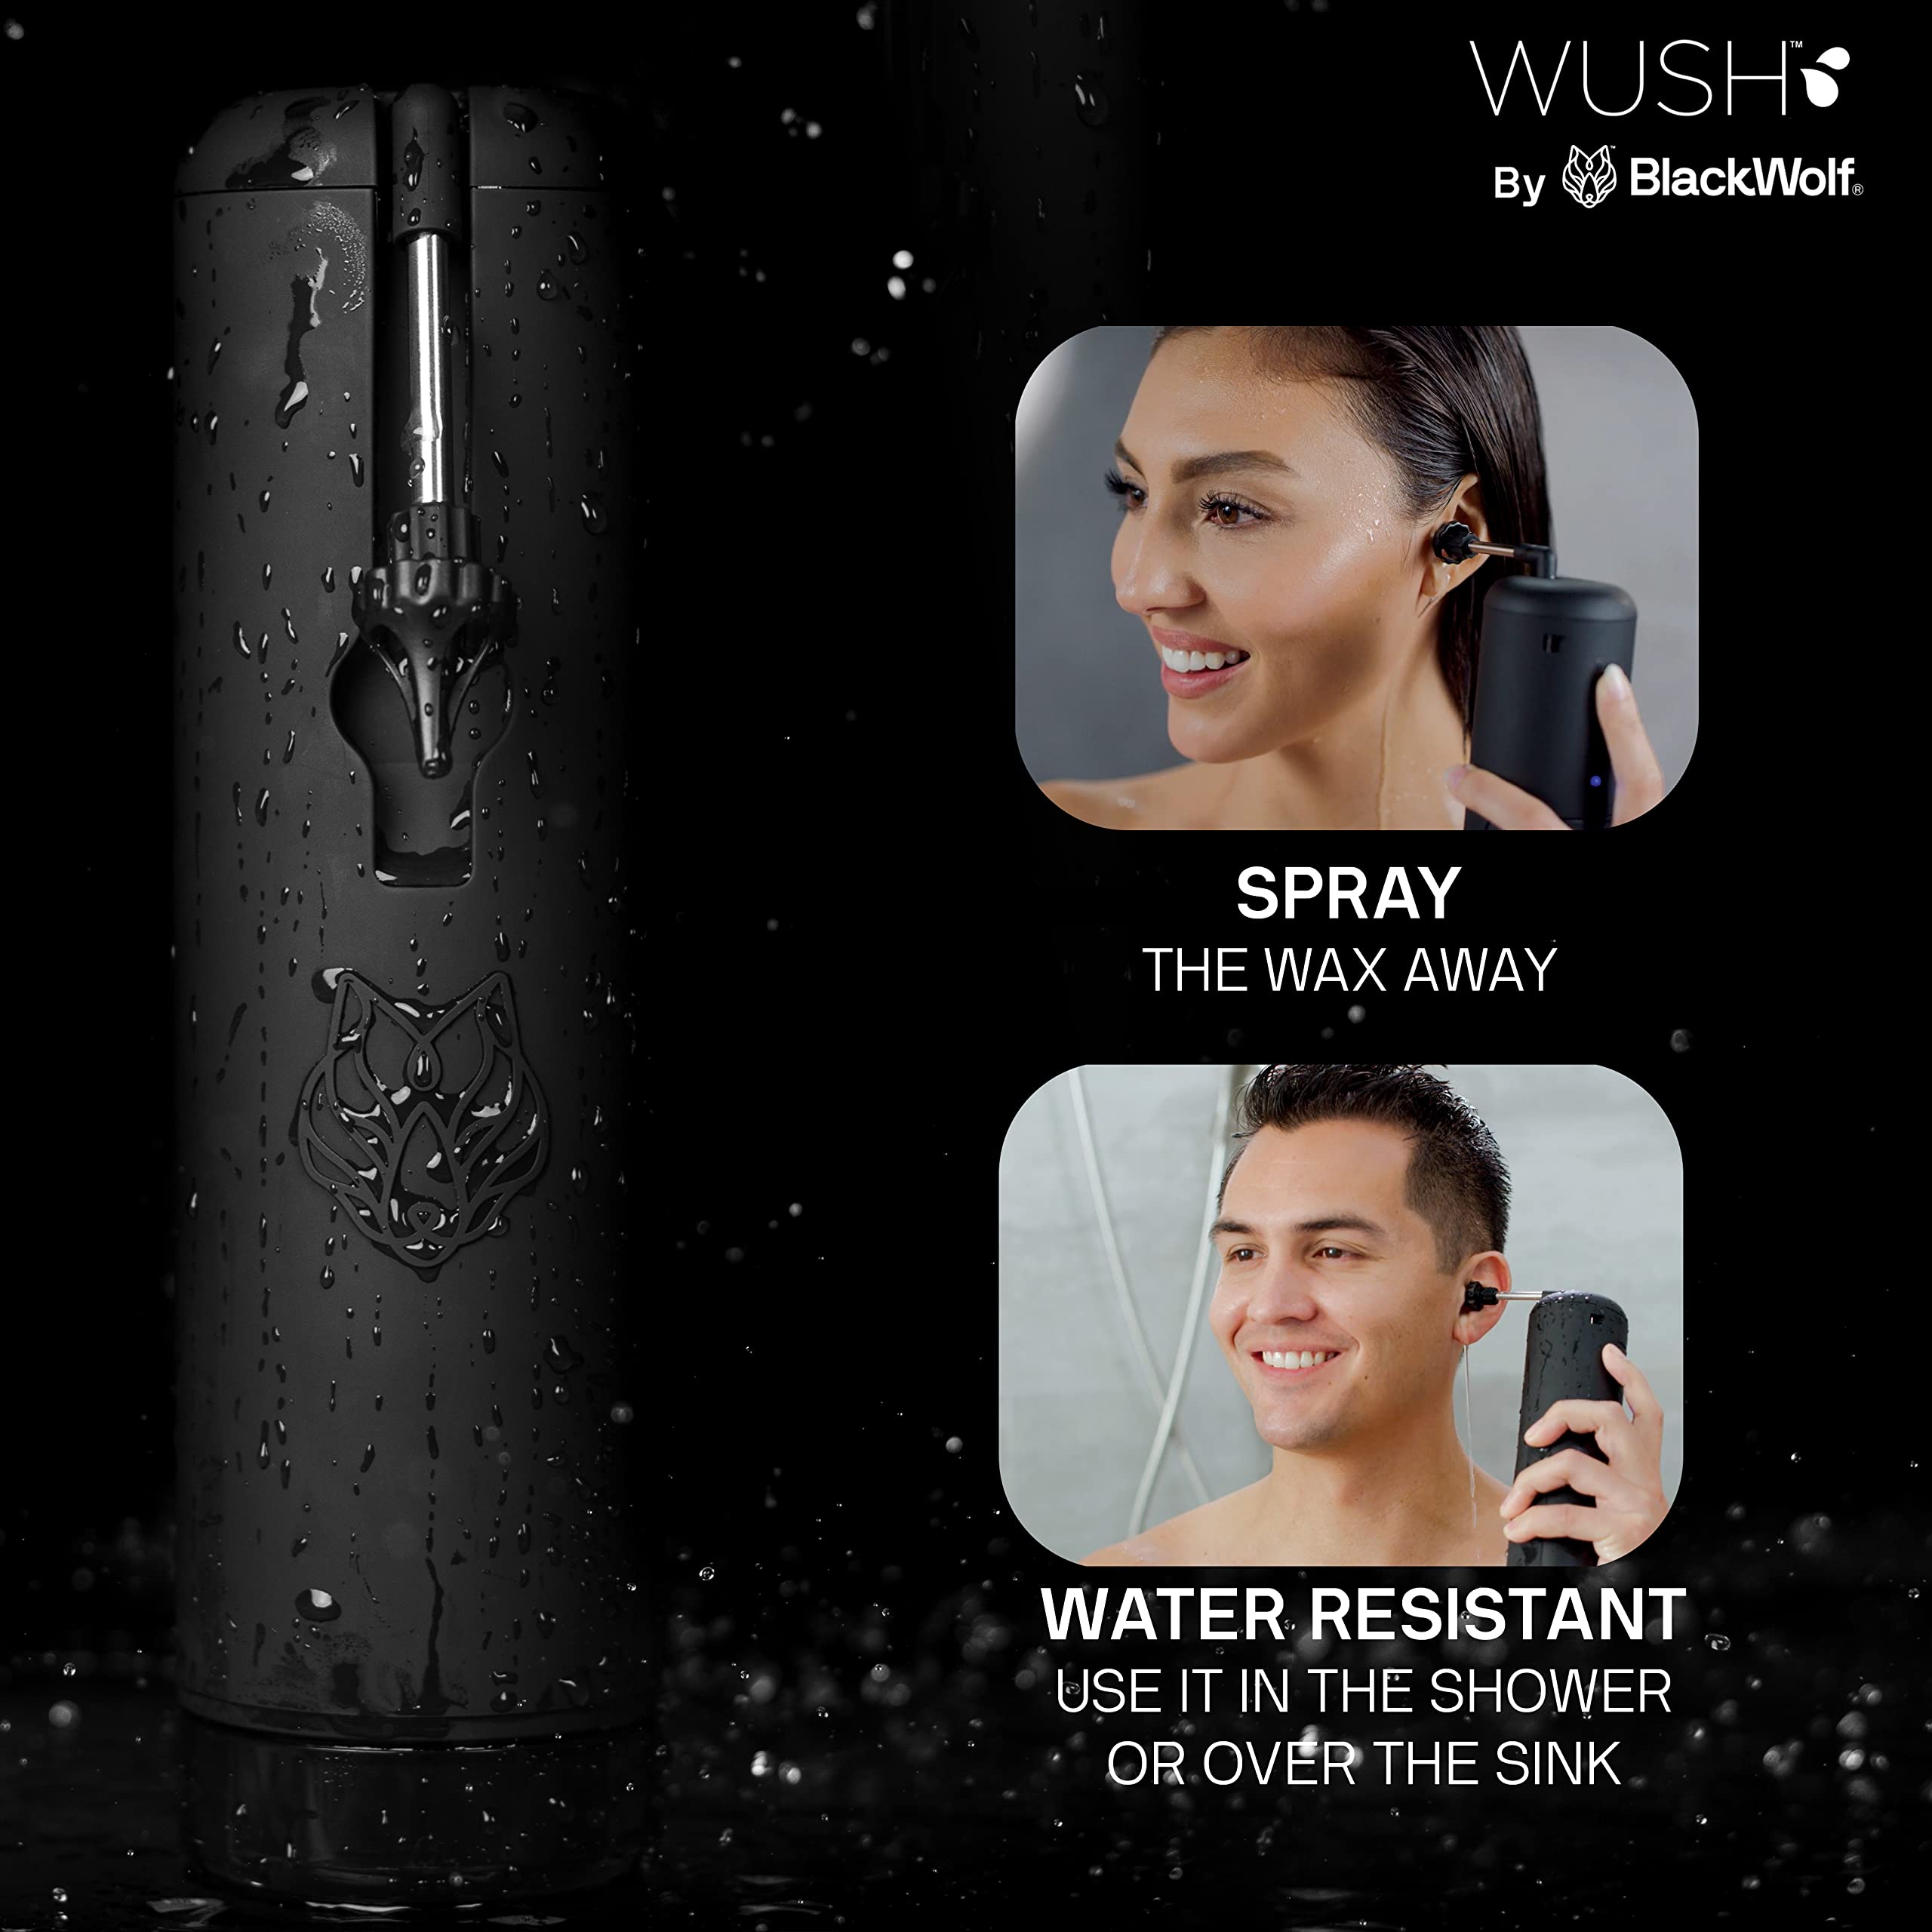 Wush Pro By Black Wolf - Deluxe Water Powered Ear Cleaner- Safe & Effective - Electric Triple Jet Stream 3 Pressure Settings For Ear Wax Buildup - Ear Wax Removal Kit- Water Resistant USB Rechargeable